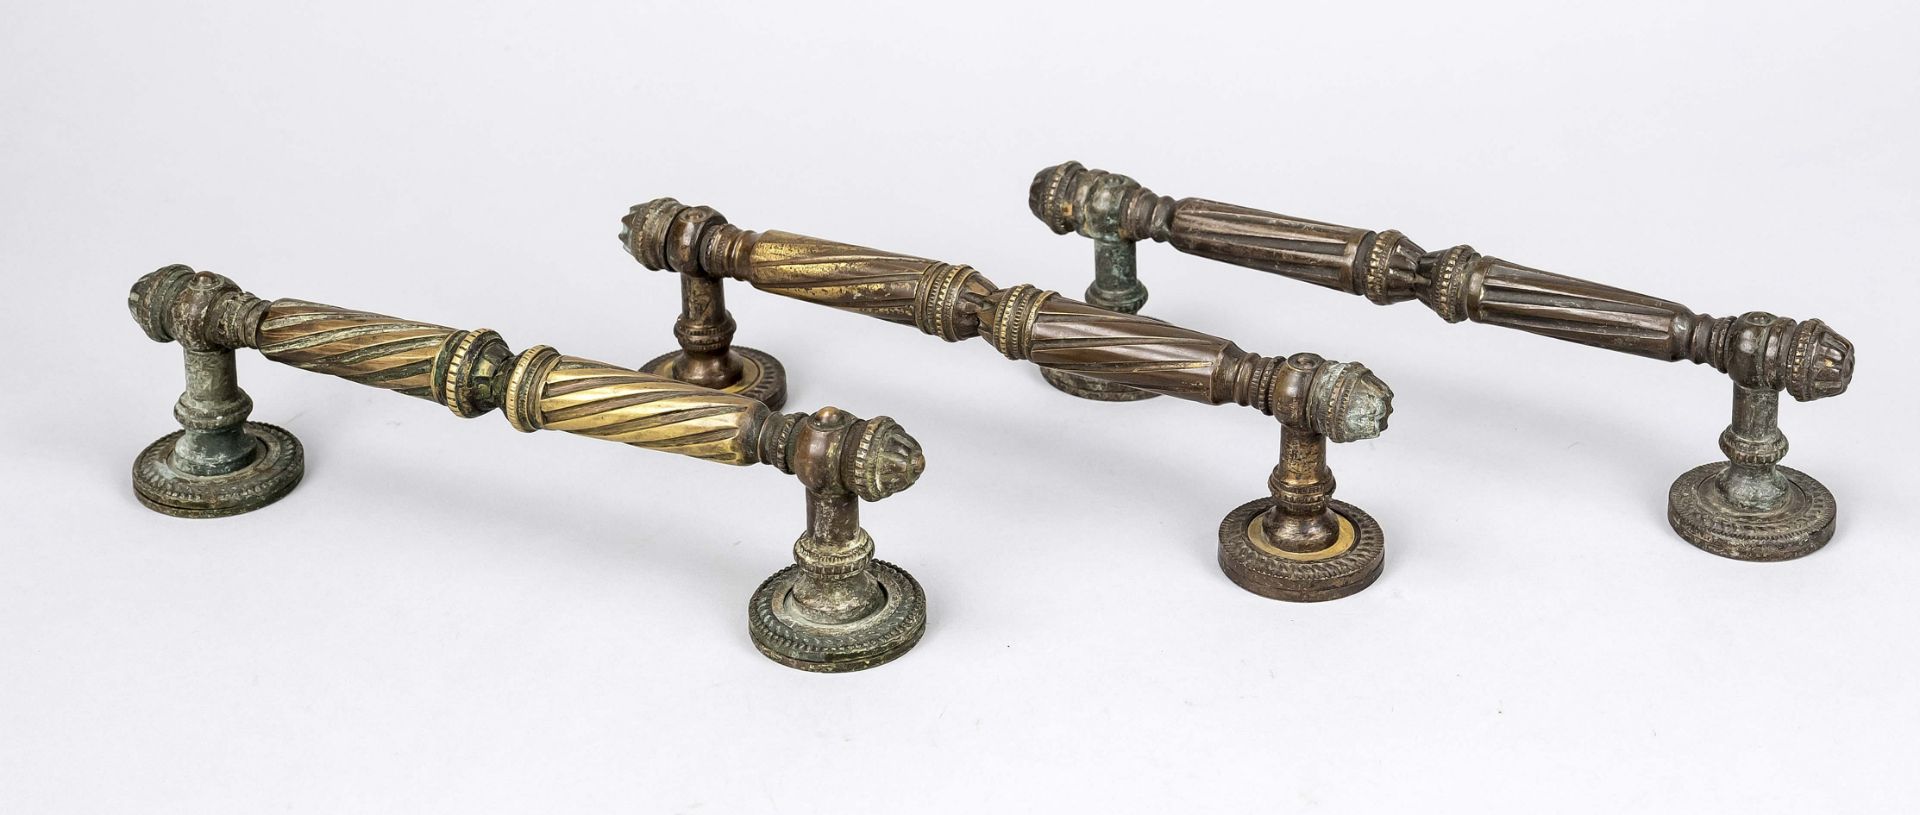 3 Door handles, late 19th century, bronze. Profiled and ornamented, fluted, w. 24 cm each.